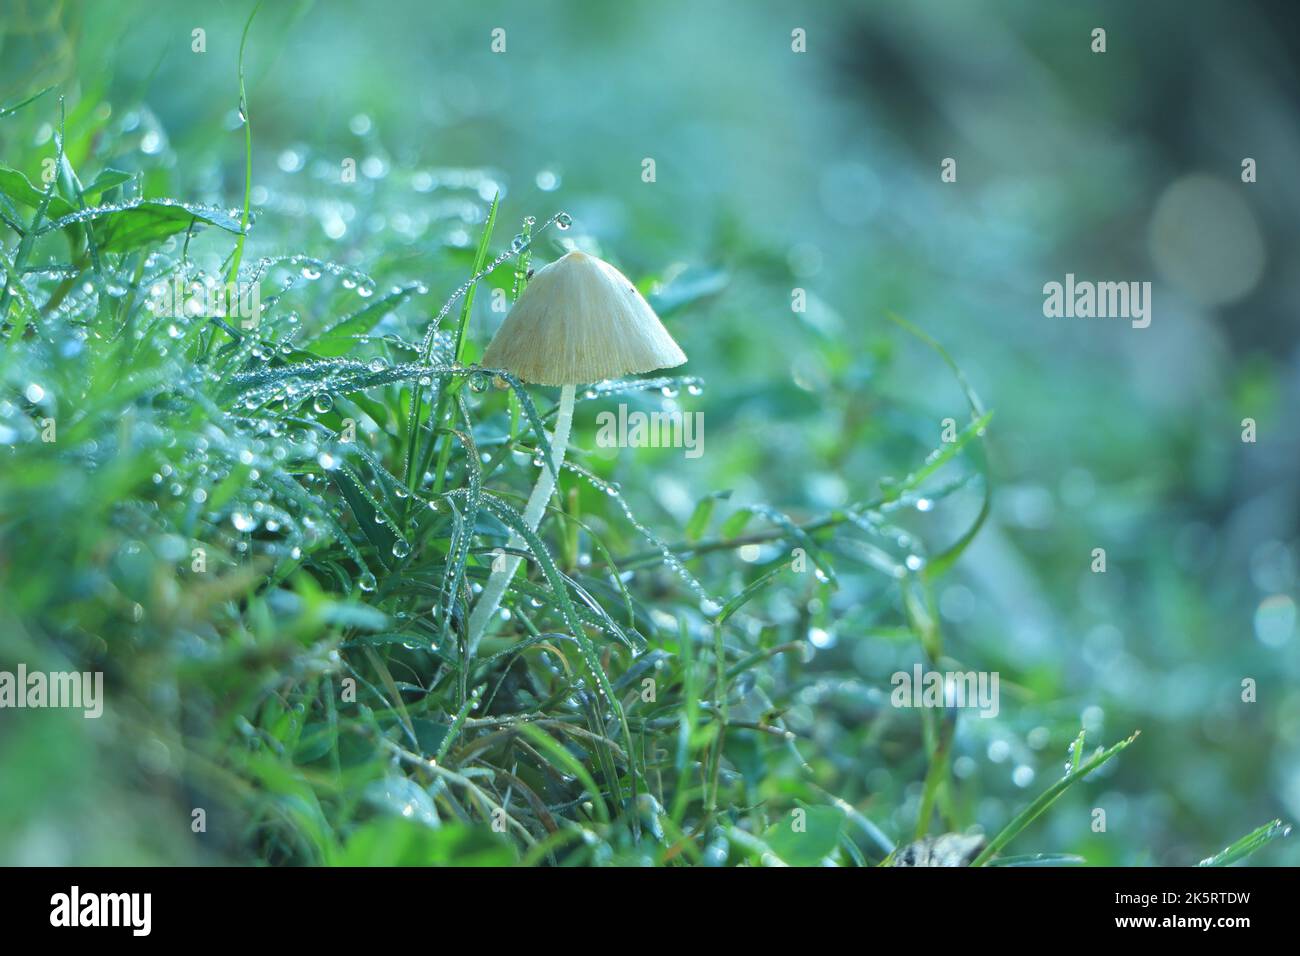 Mushrooms and Moss in the forest Stock Photo